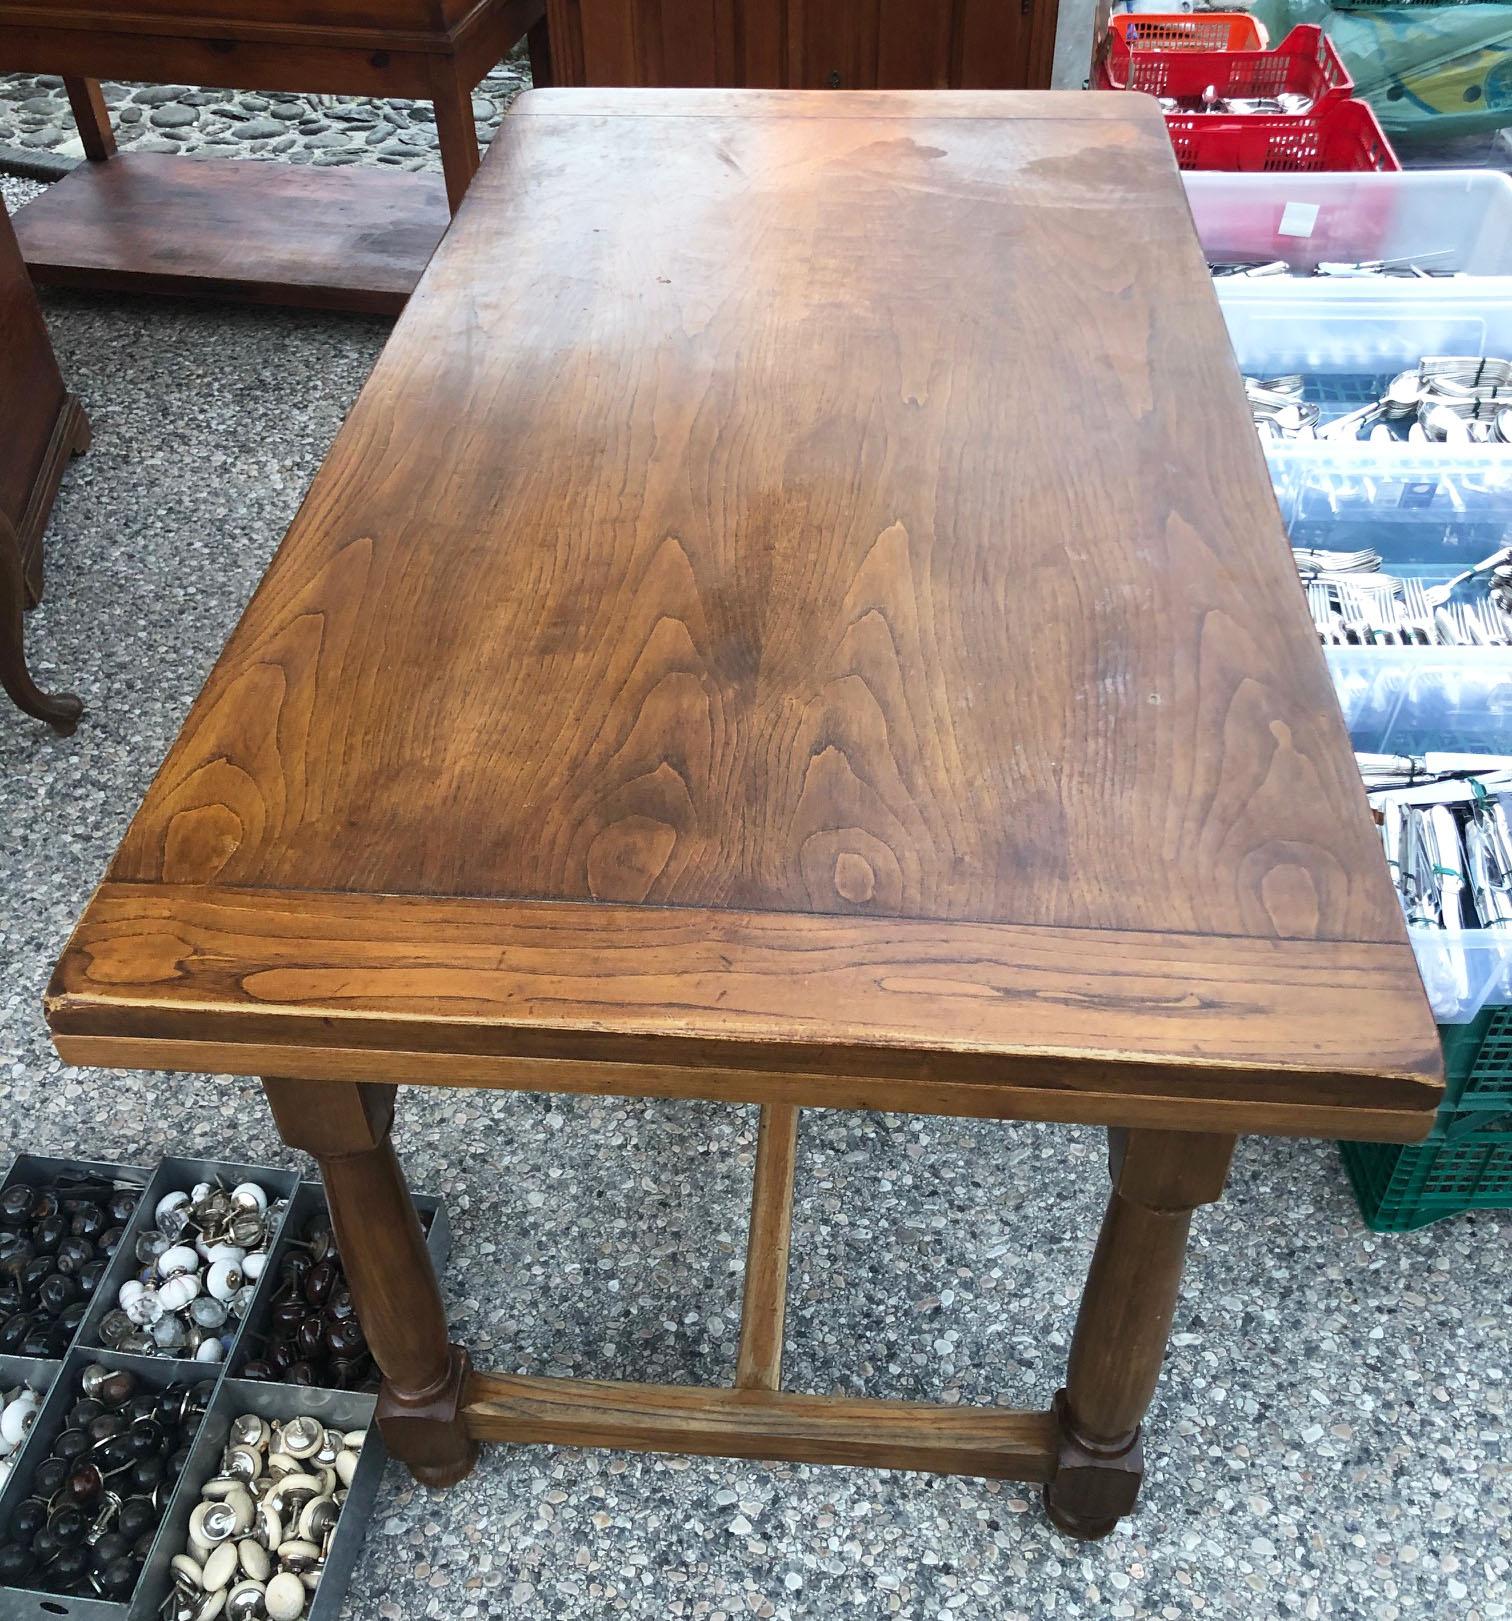 1950s Chestnut rustic  solid table, original Italian, extendable, with turned leg.
The top and the legs are in solid chestnut.
Original paint
The size are:
Closed 150 x 80 x 80 H
Open 250 x 80 x 80 H.
Comes from an old country house in the Pisa area